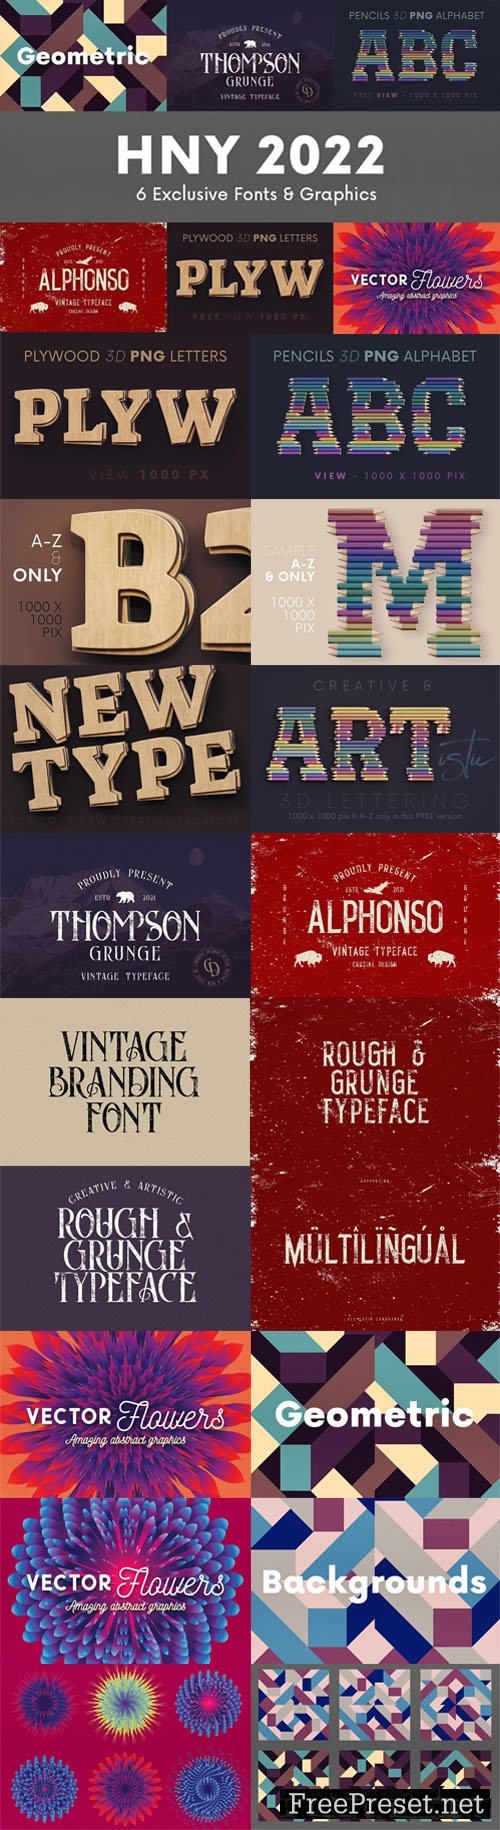 2022 Design Resources Collection Vol.2 - 6 Exclusive Fonts & Graphics